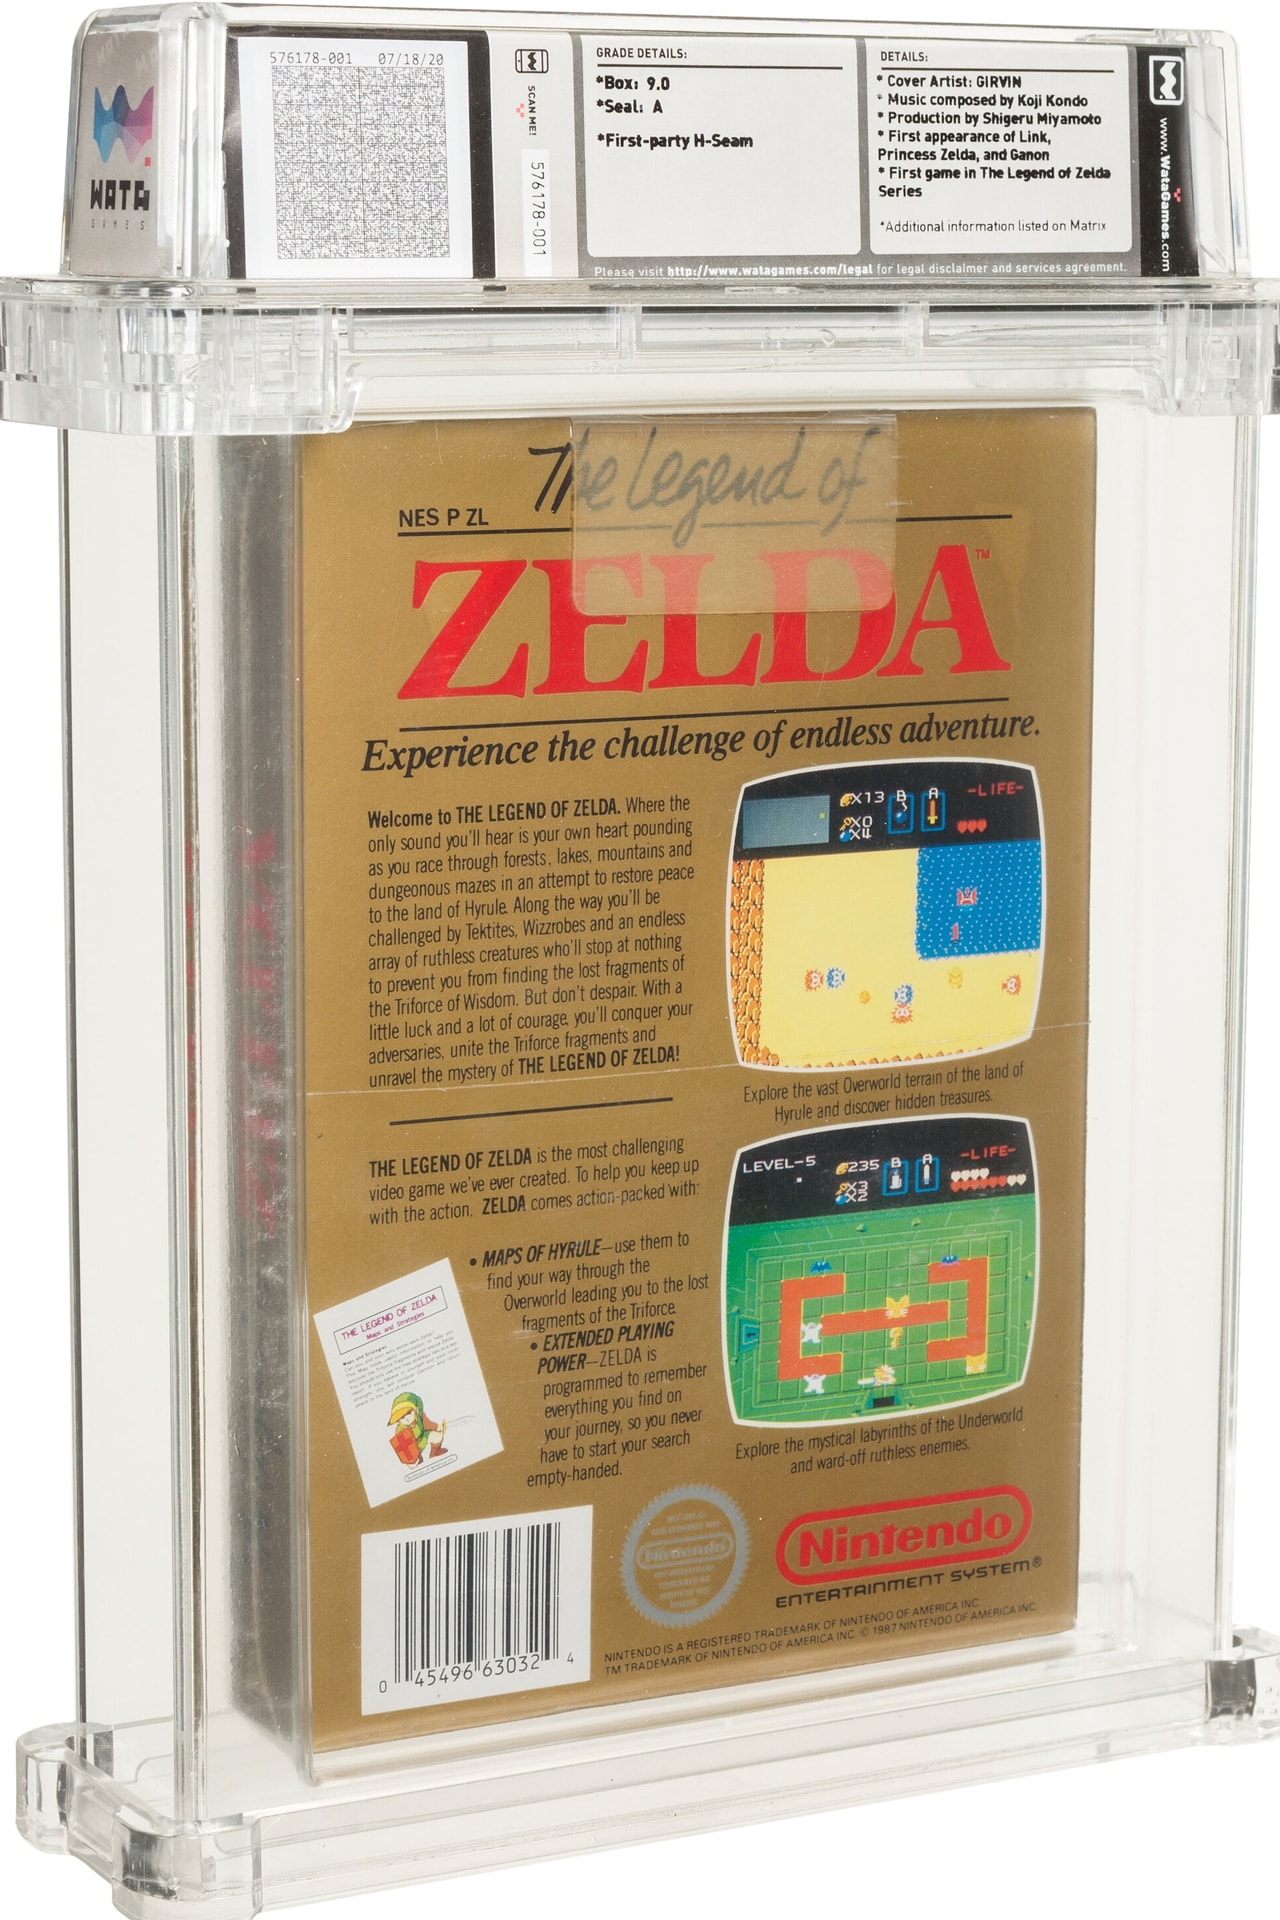 Sealed Copy of ‘The Legend of Zelda’ From 1987 Sells for a Record $870,000 USD